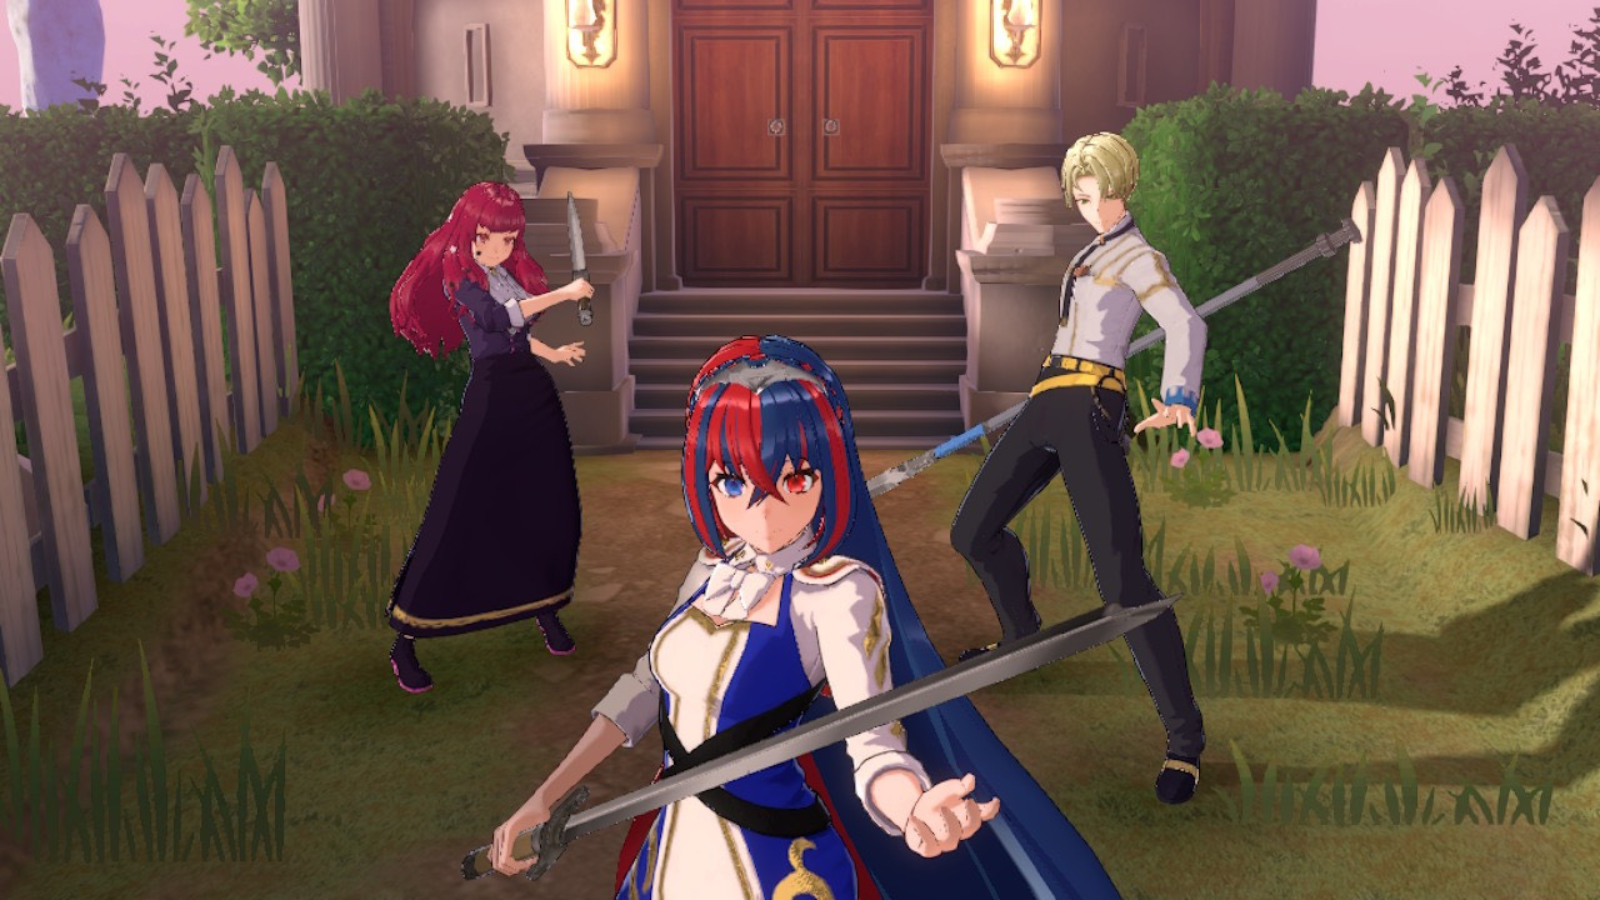 Fire Emblem Engage: The best classes for each character